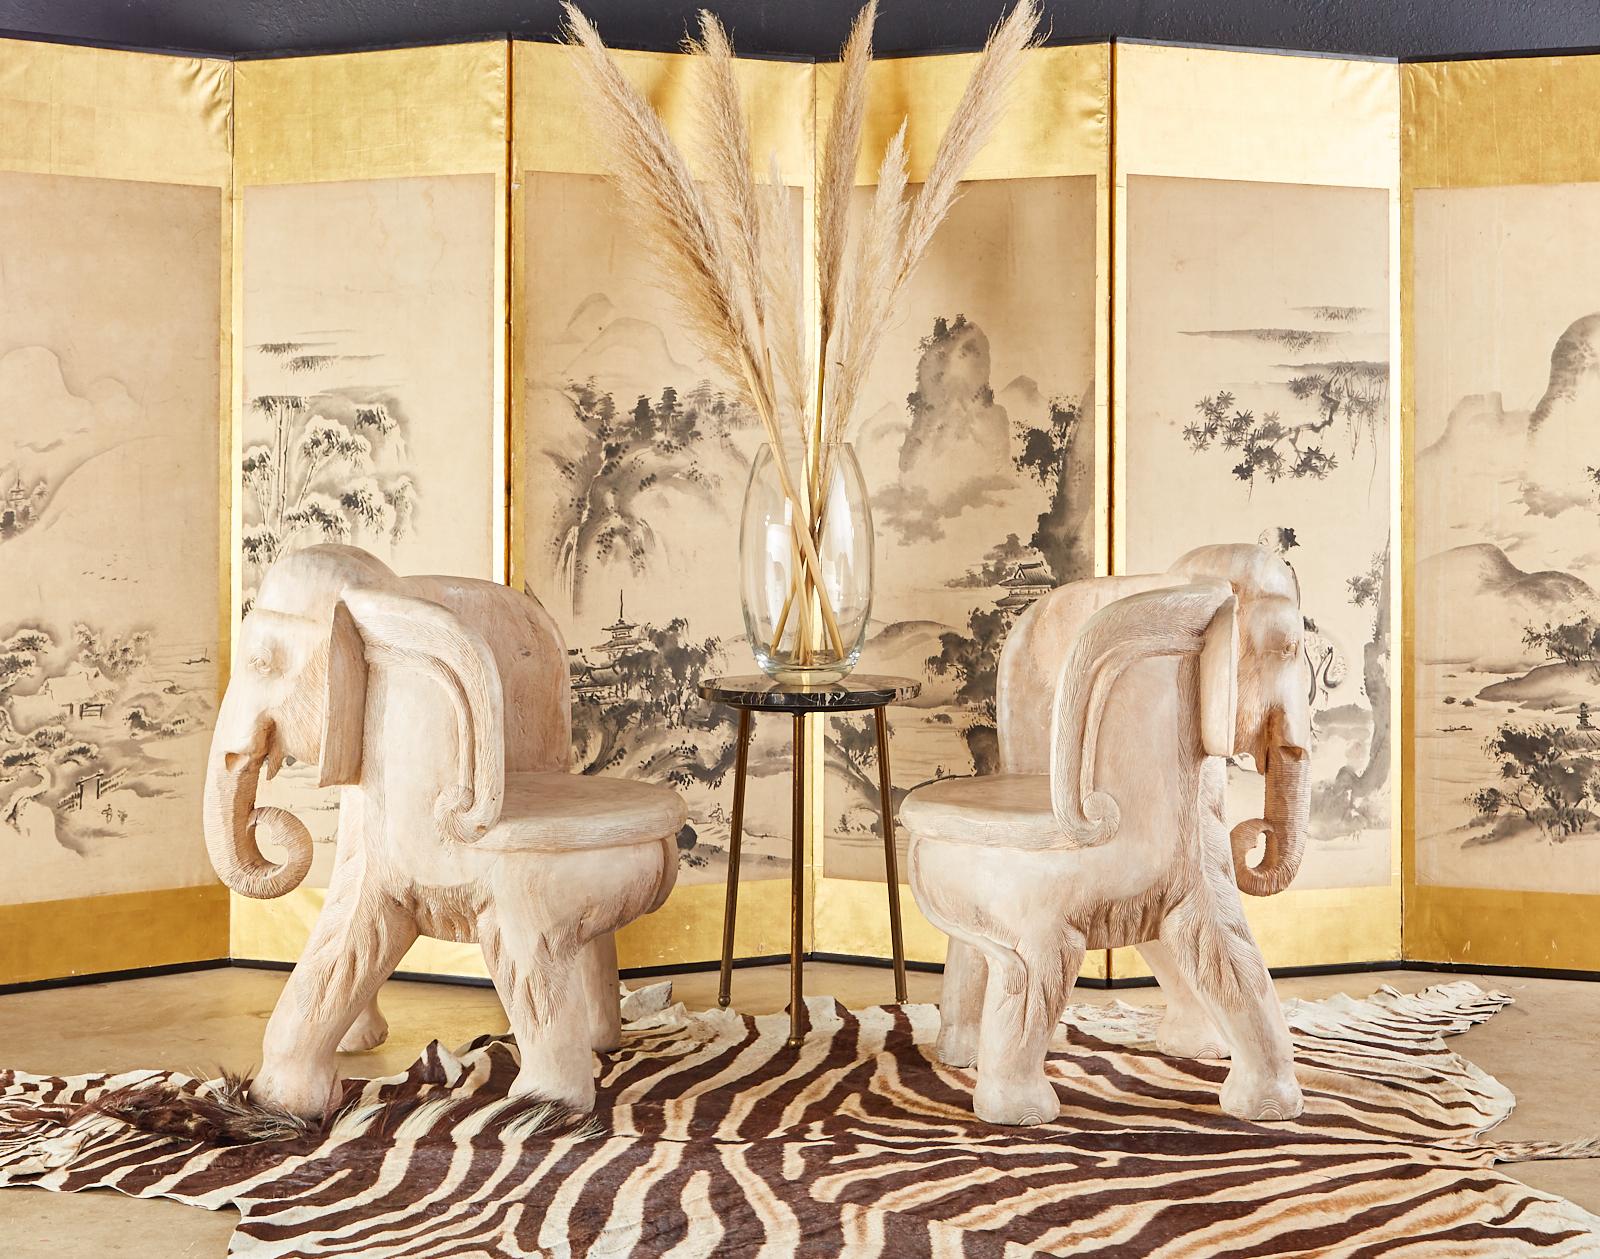 Charming pair of hand carved hardwood elephant chairs crafted from large tree trunks. Beautifully crafted with detailed faces and trunks. Featuring a white-washed or bleached finish that gives them an attractive patina but still showcases the